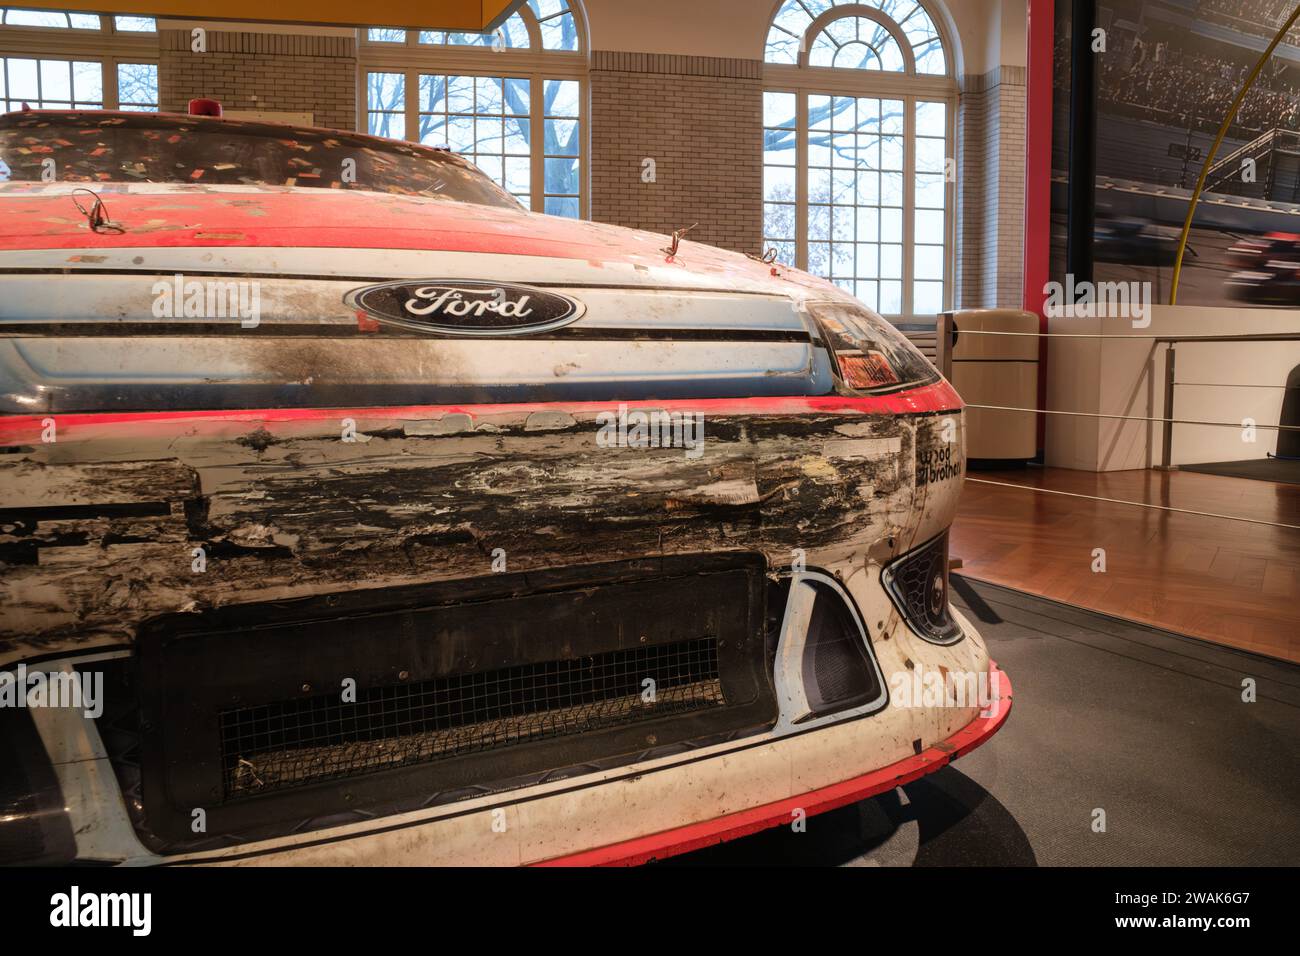 Ford Fusion NASCAR cup car, driven to the 2011 Daytona 500 win by Trevor Bayne, on display at the Henry Ford Museum of American Innovation Stock Photo